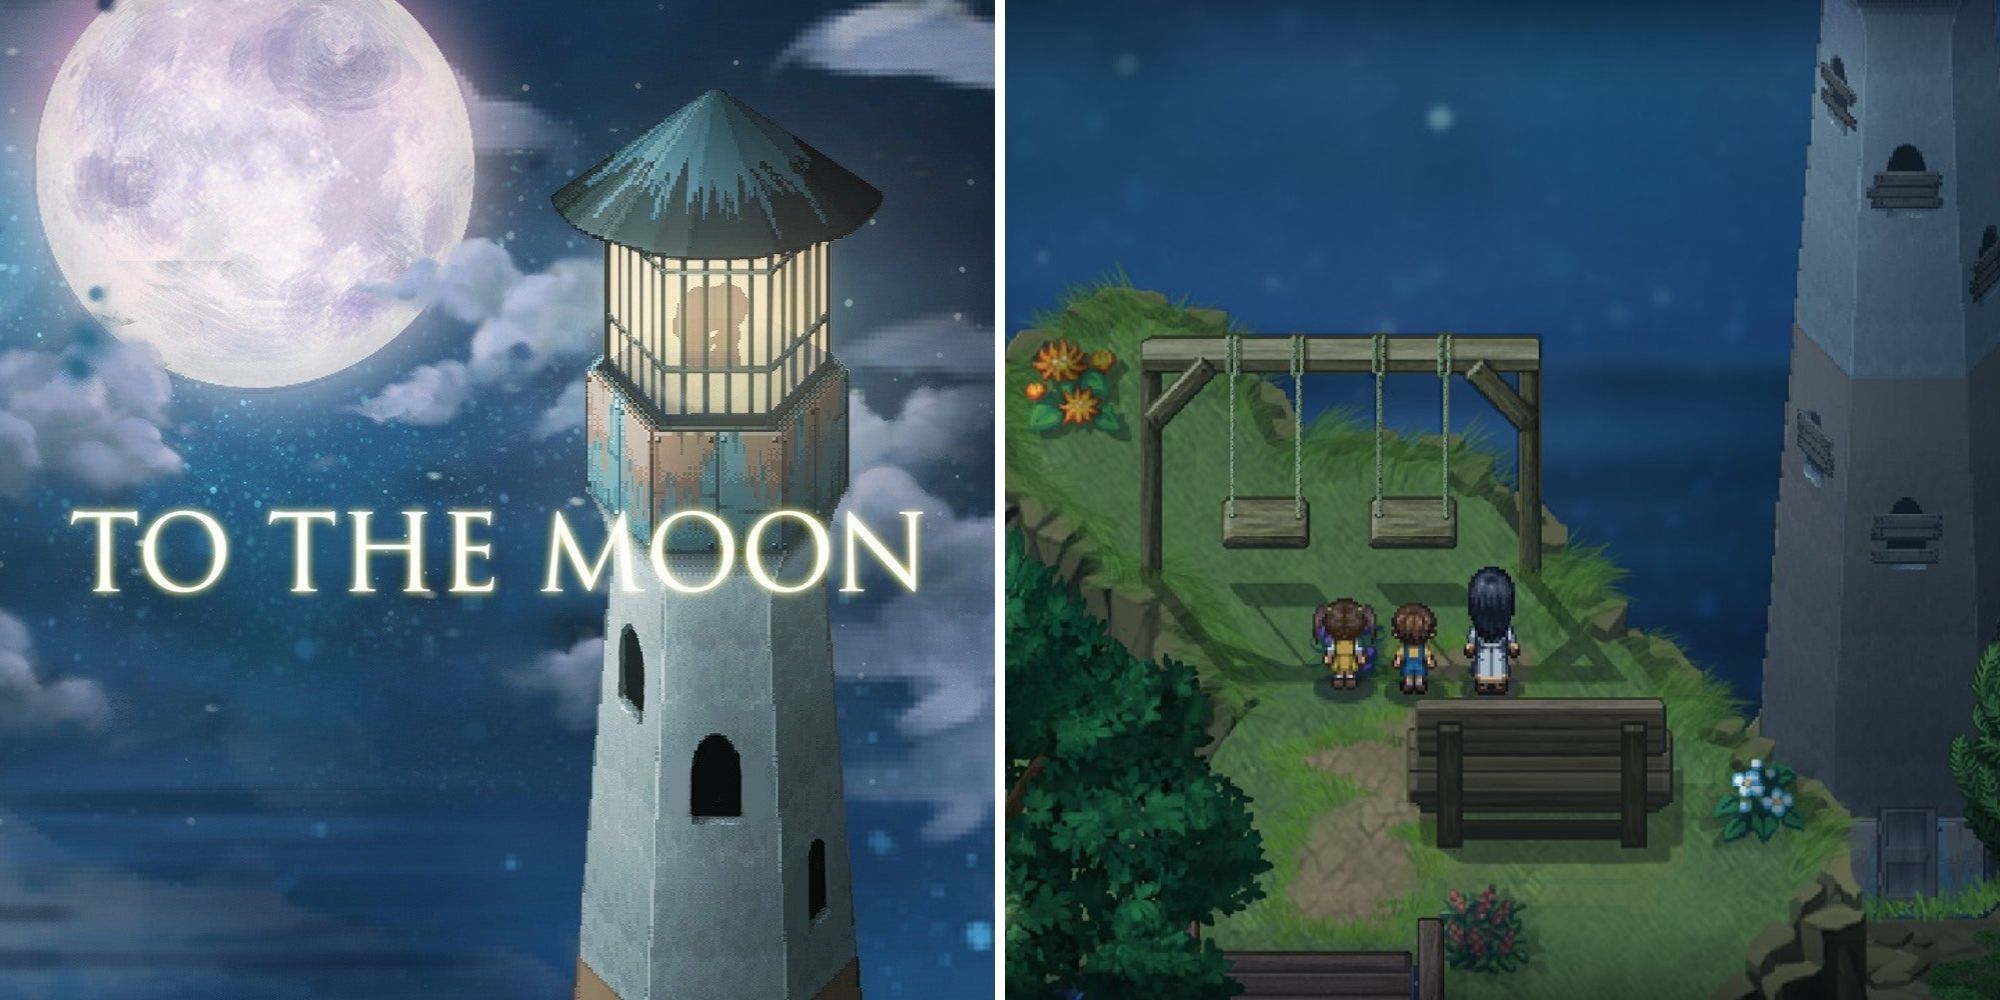 To The Moon Official Artwork and the kids at the lighthouse on a swing set